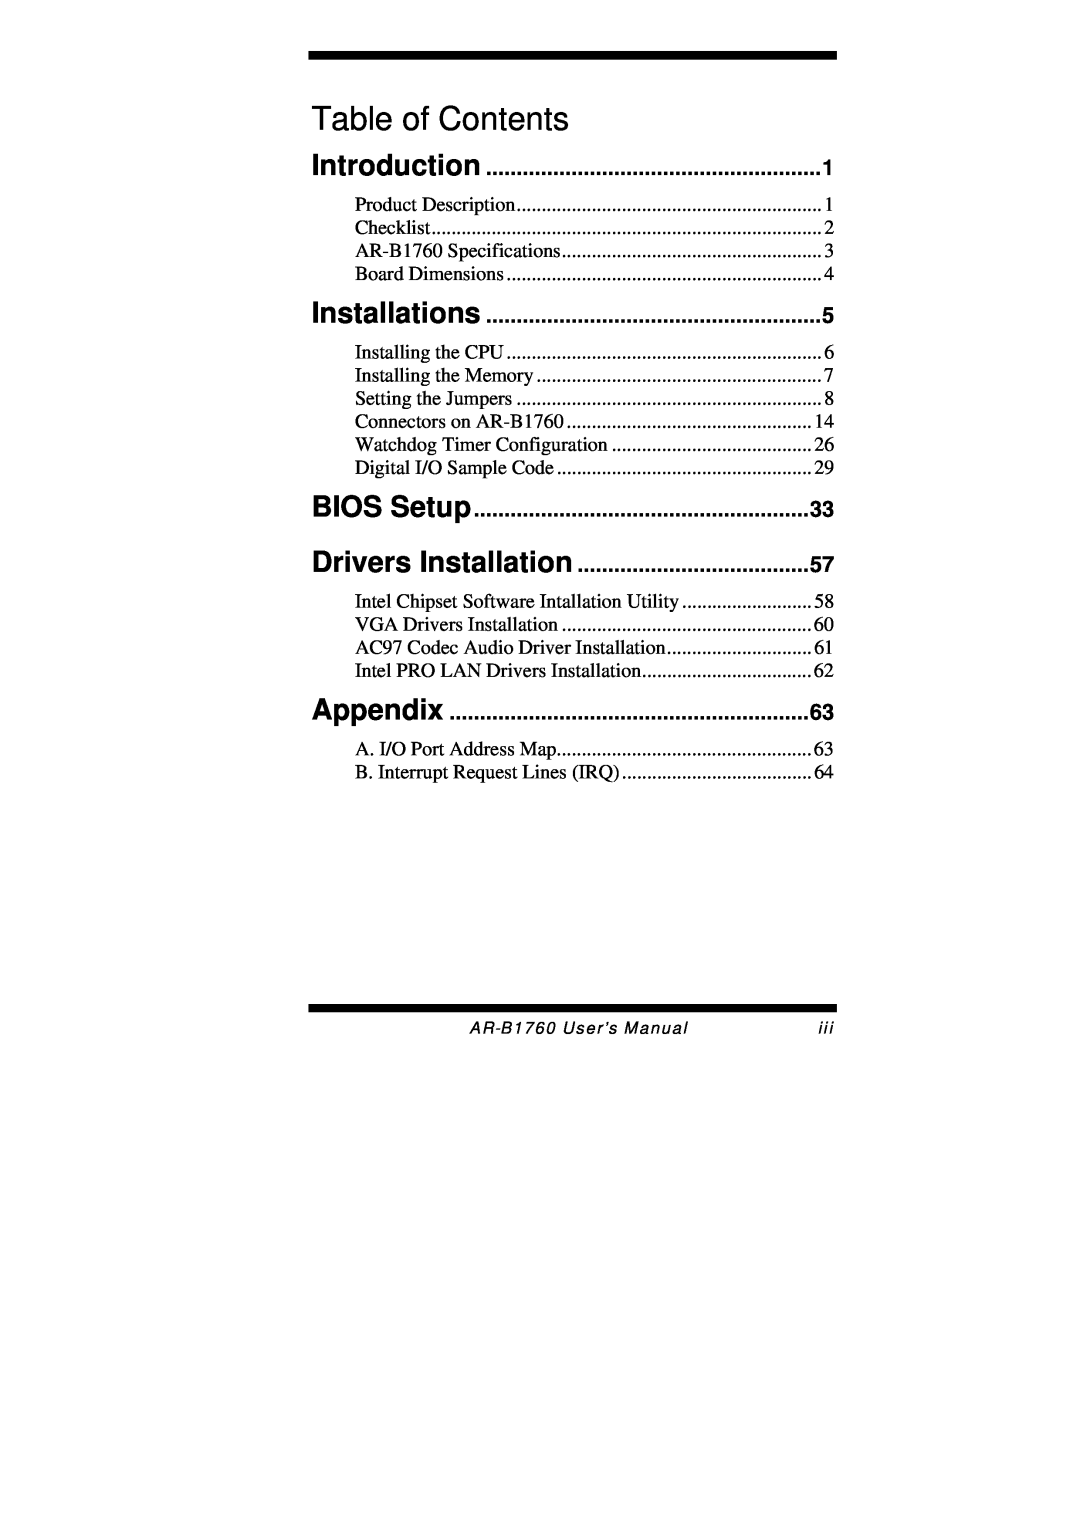 Intel AR-B1760 user manual Introduction, Installations, BIOS Setup, Drivers Installation, Appendix, Table of Contents 